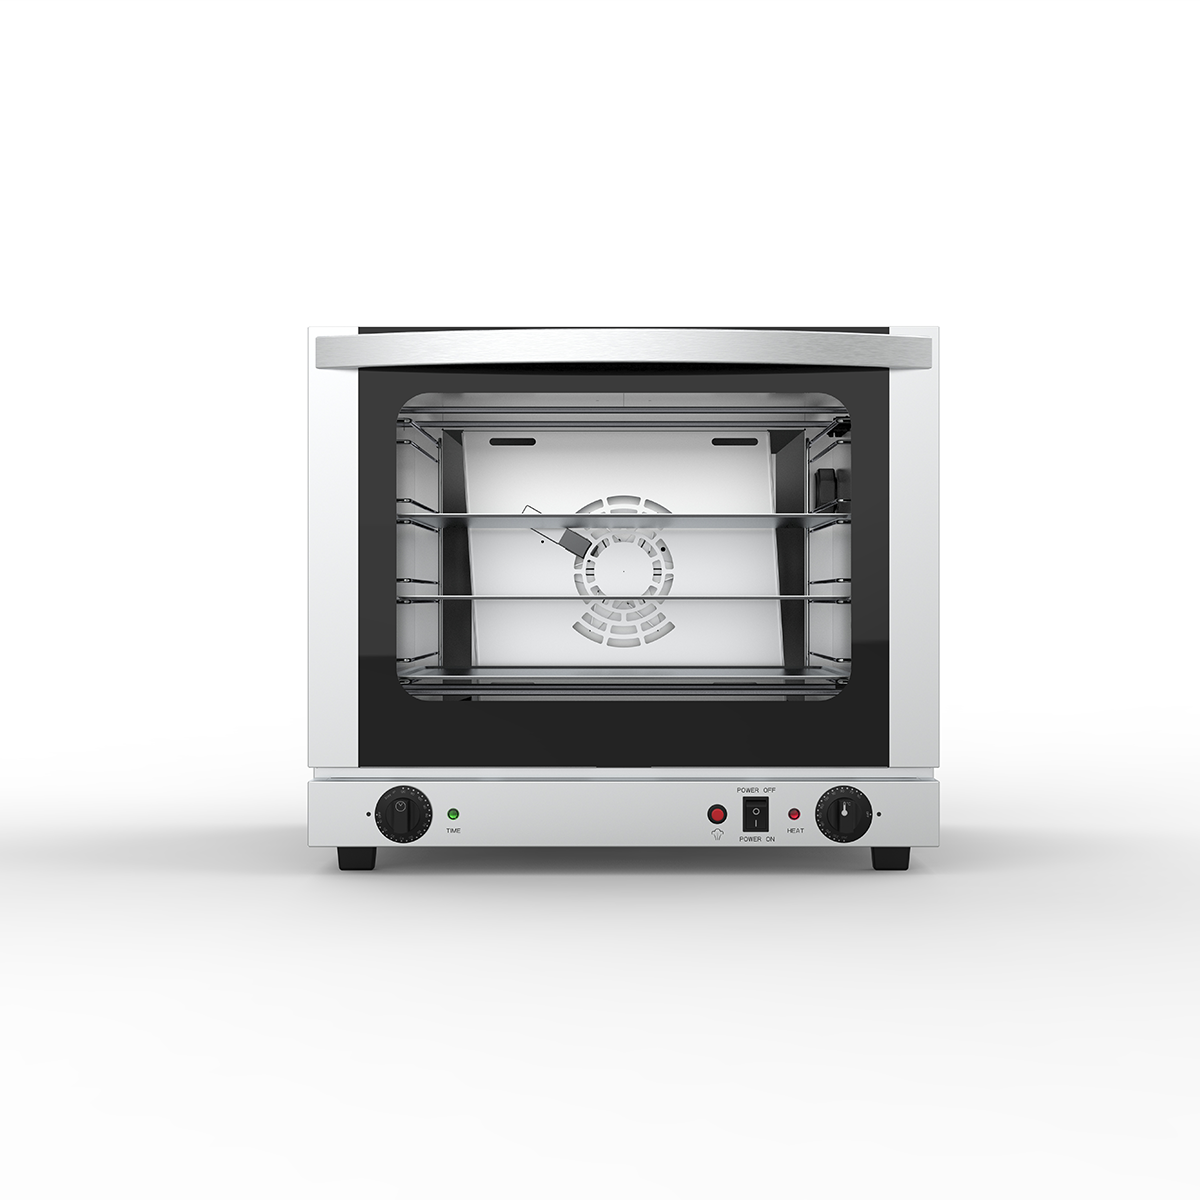 57 Litre Convection Oven Electric with Humidification Function